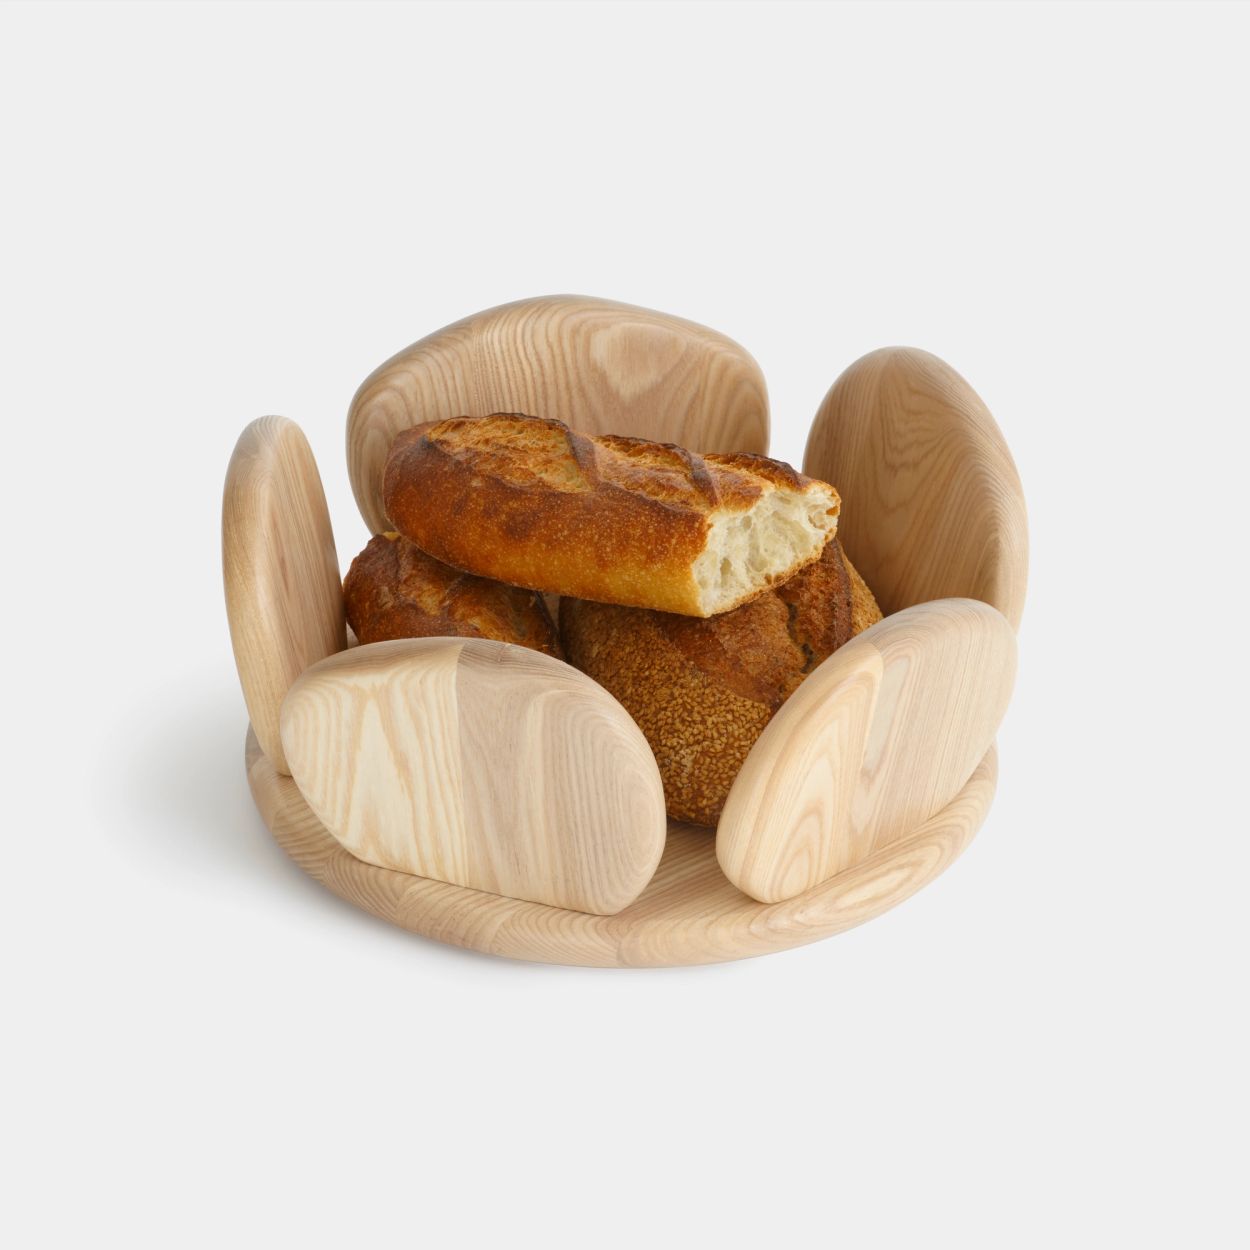 wooden bowl with bread inside